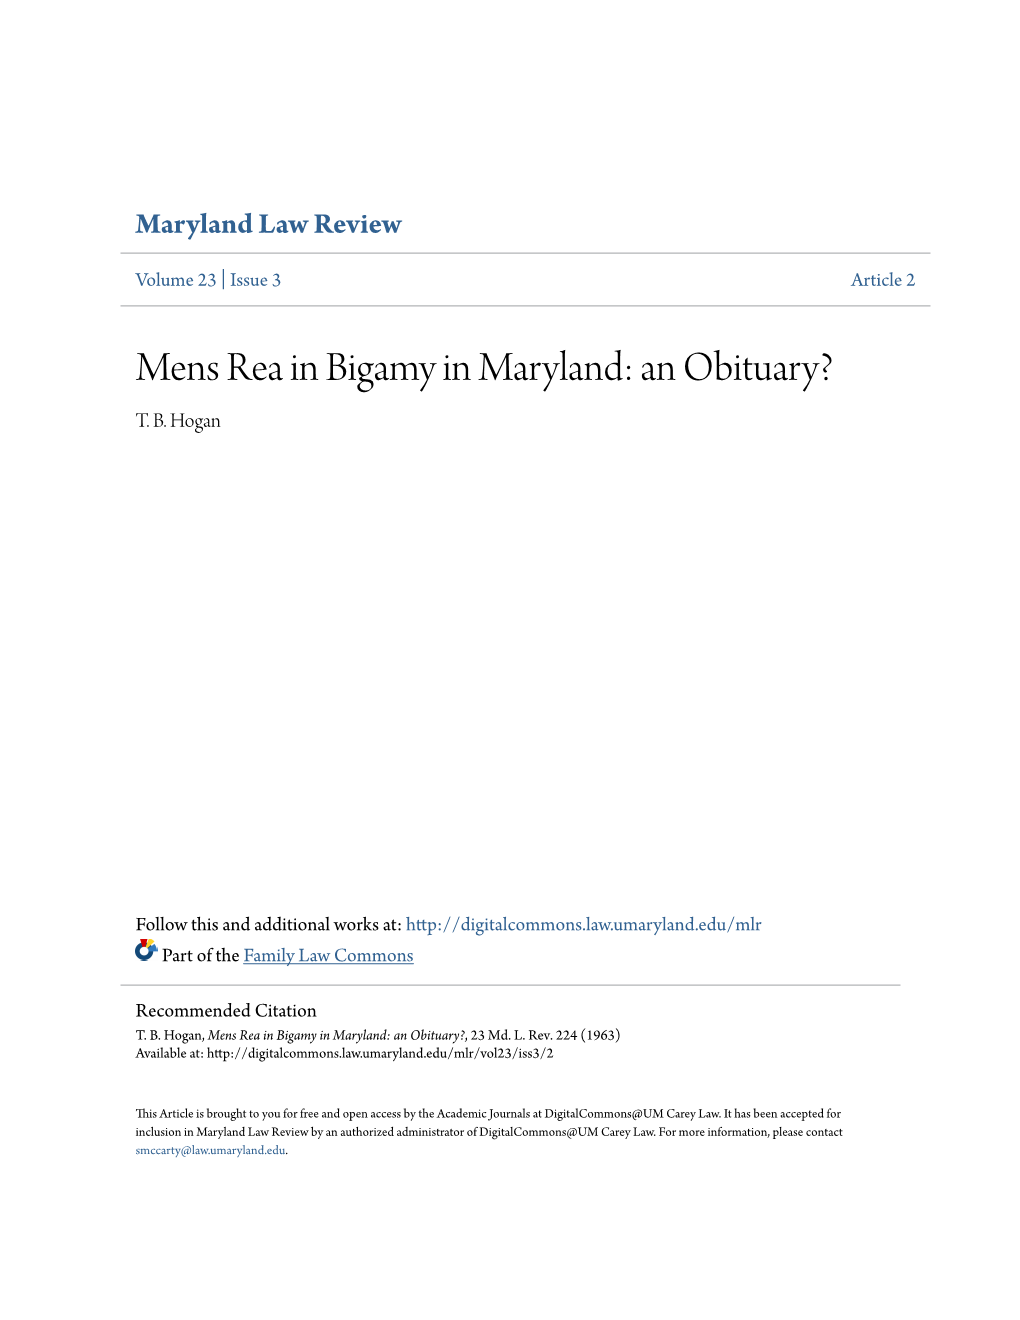 Mens Rea in Bigamy in Maryland: an Obituary? T